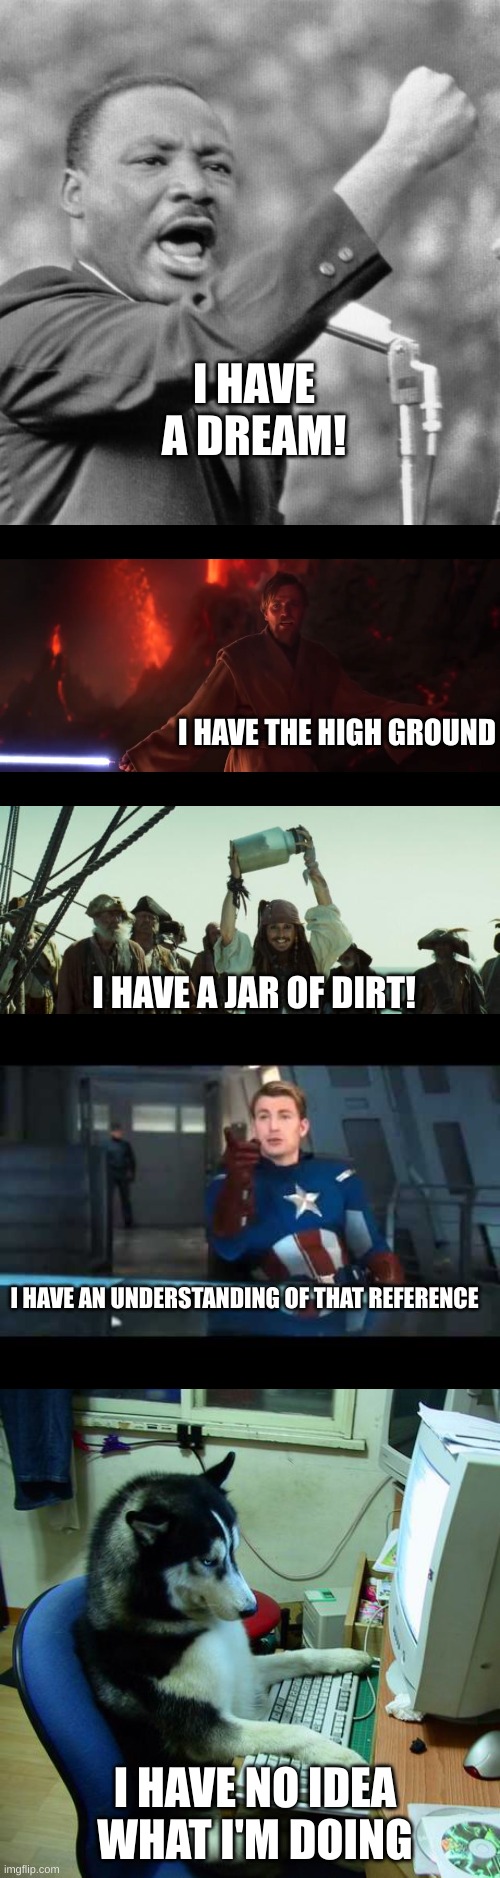 i have a title | I HAVE A DREAM! I HAVE THE HIGH GROUND; I HAVE A JAR OF DIRT! I HAVE AN UNDERSTANDING OF THAT REFERENCE; I HAVE NO IDEA WHAT I'M DOING | image tagged in i have a dream,i have the high ground,jack sparrow jar of dirt,captain america understood that reference,memes | made w/ Imgflip meme maker